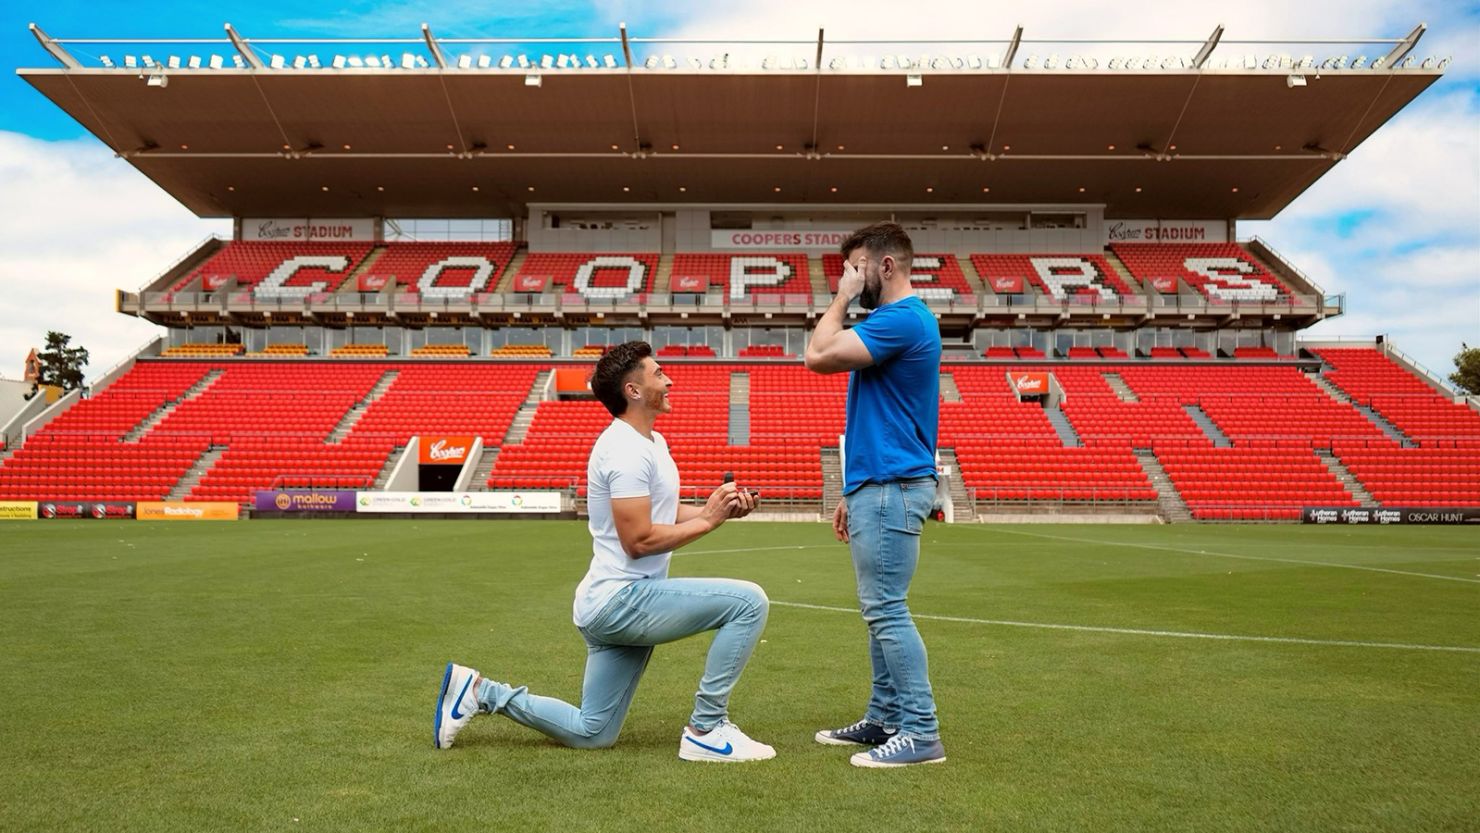 Soccer star Joshua Cavallo proposing to his partner Leighton Morrell at Coopers Stadium in Adelaide.